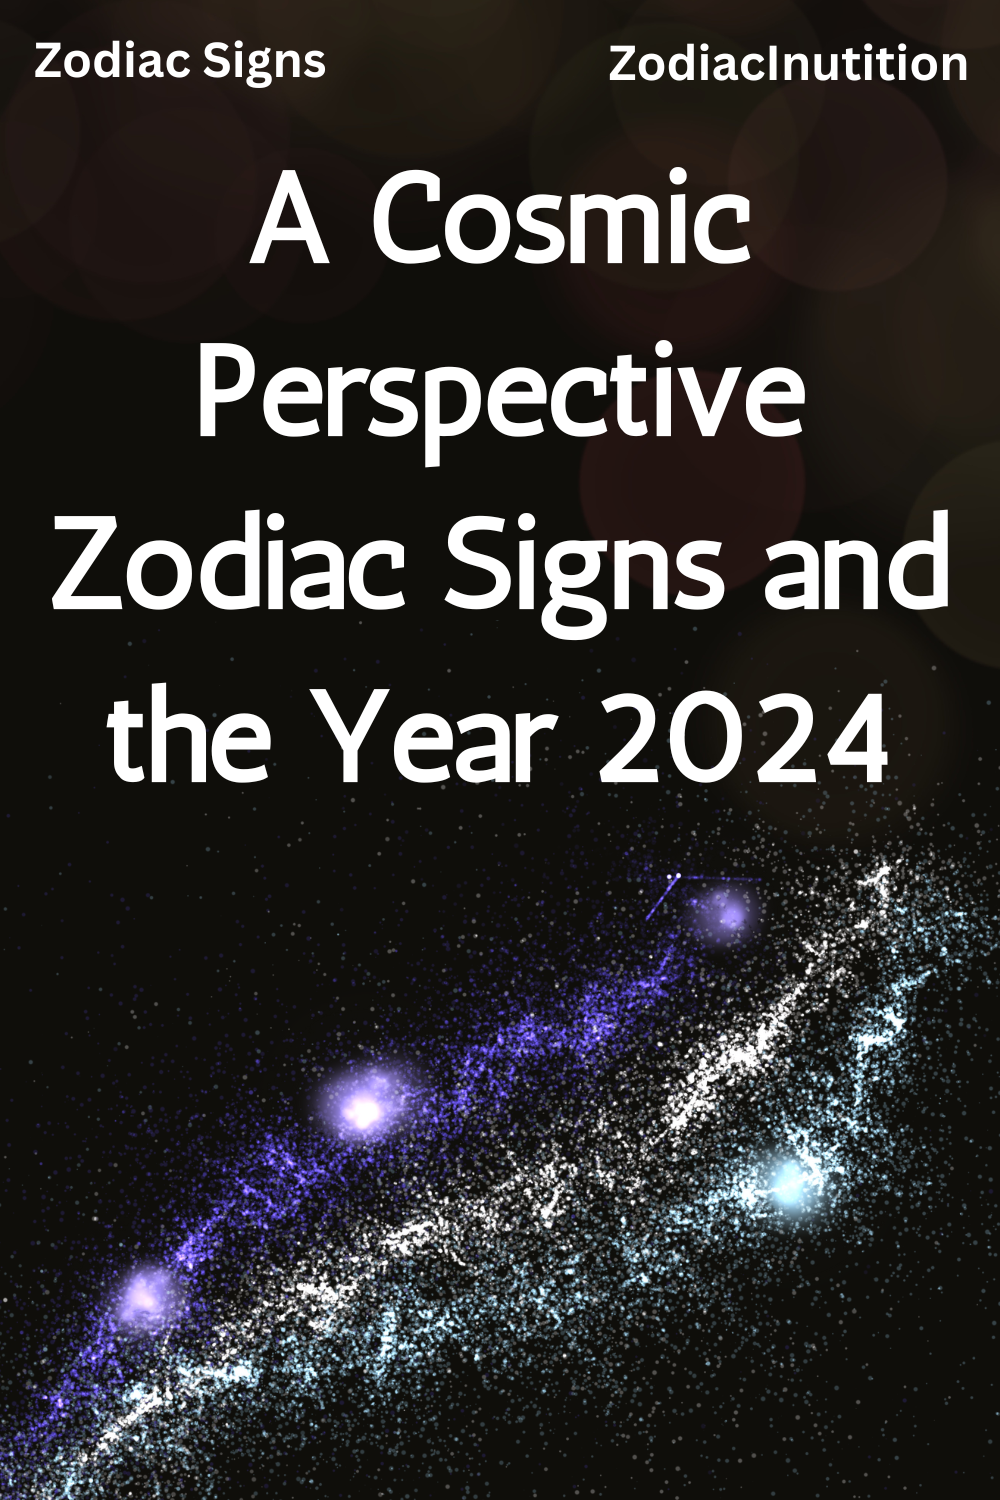 A Cosmic Perspective Zodiac Signs and the Year 2024